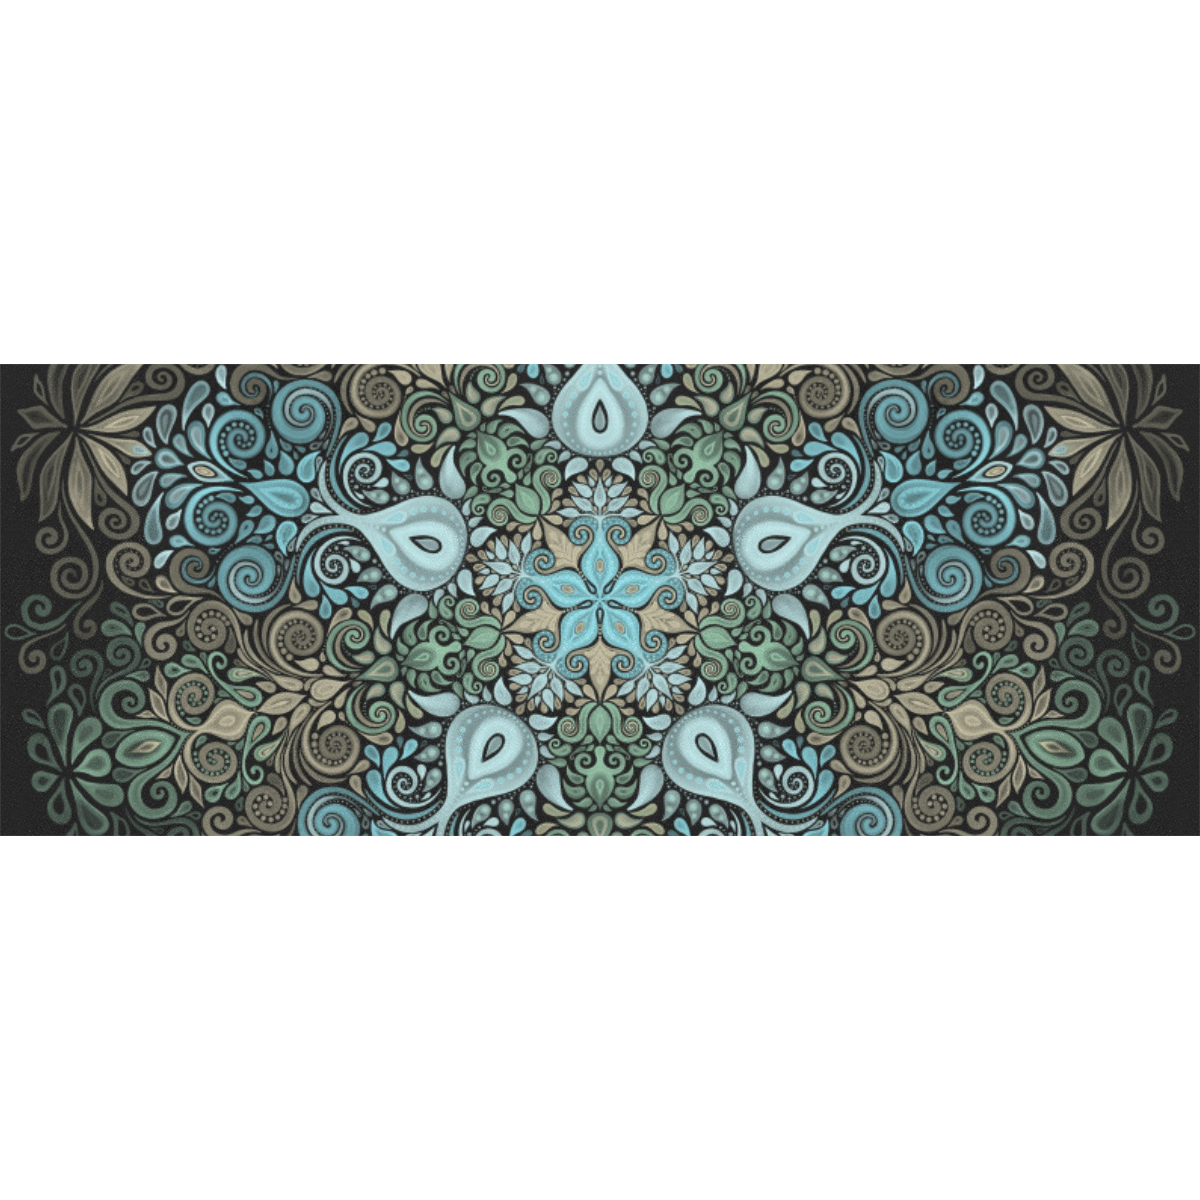 Baroque Garden Watercolor Turquoise Mandala Gift Wrapping Paper 58"x 23" (5 Rolls)